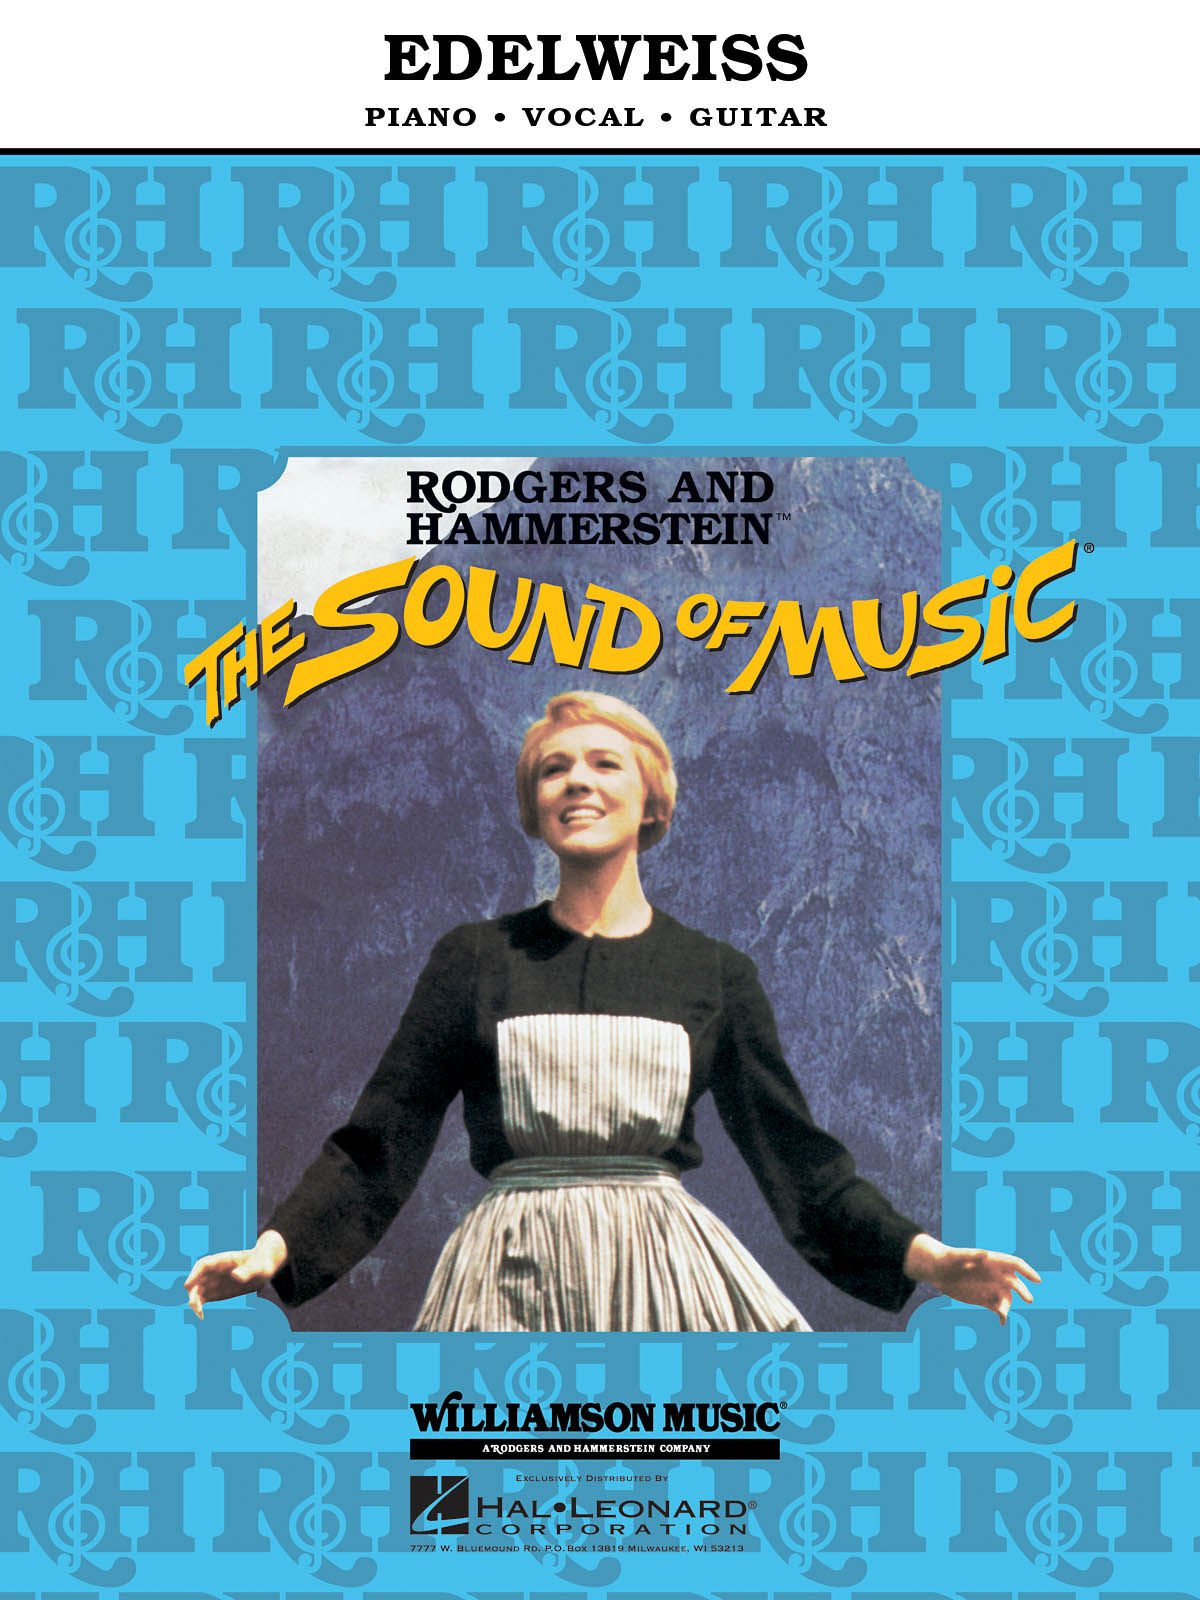 Richard Rogers: Edelweiss (The Sound Of Music) (PVG)